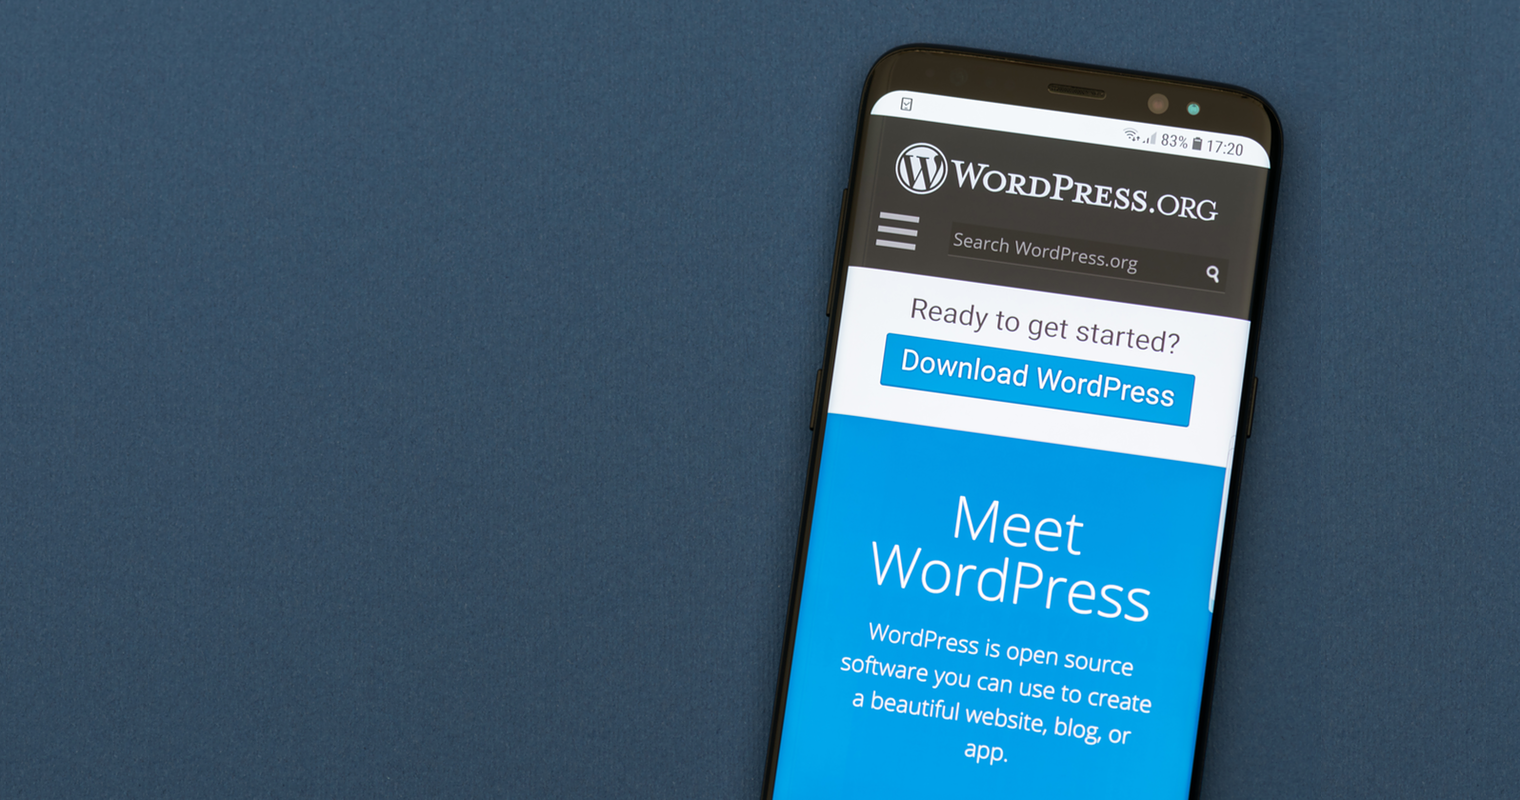 7 Crucial WordPress Plugins for Blogs & Businesses